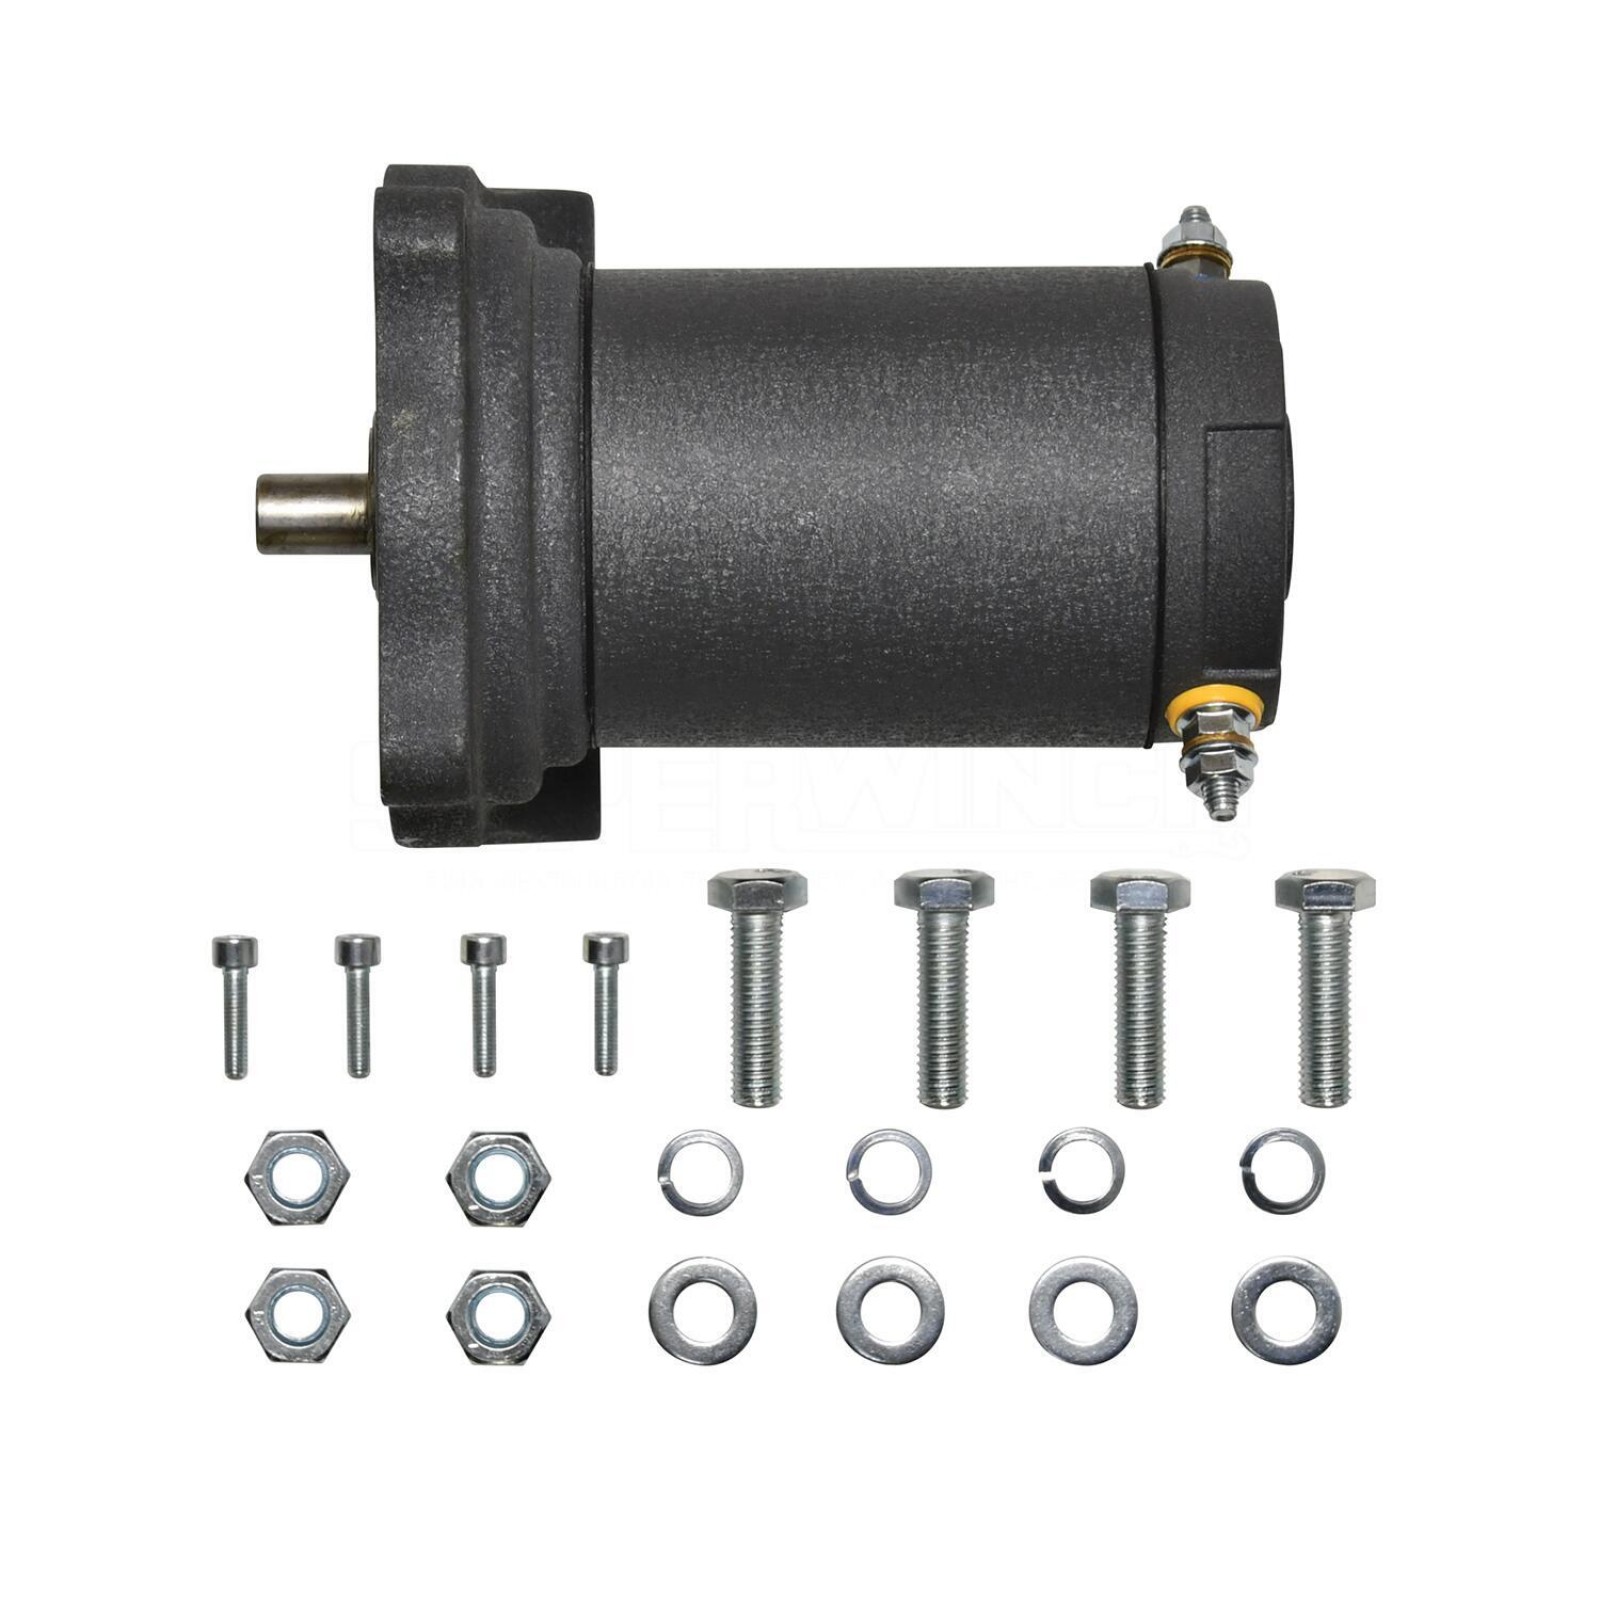 Replacement Motor for Terra 25 Winch